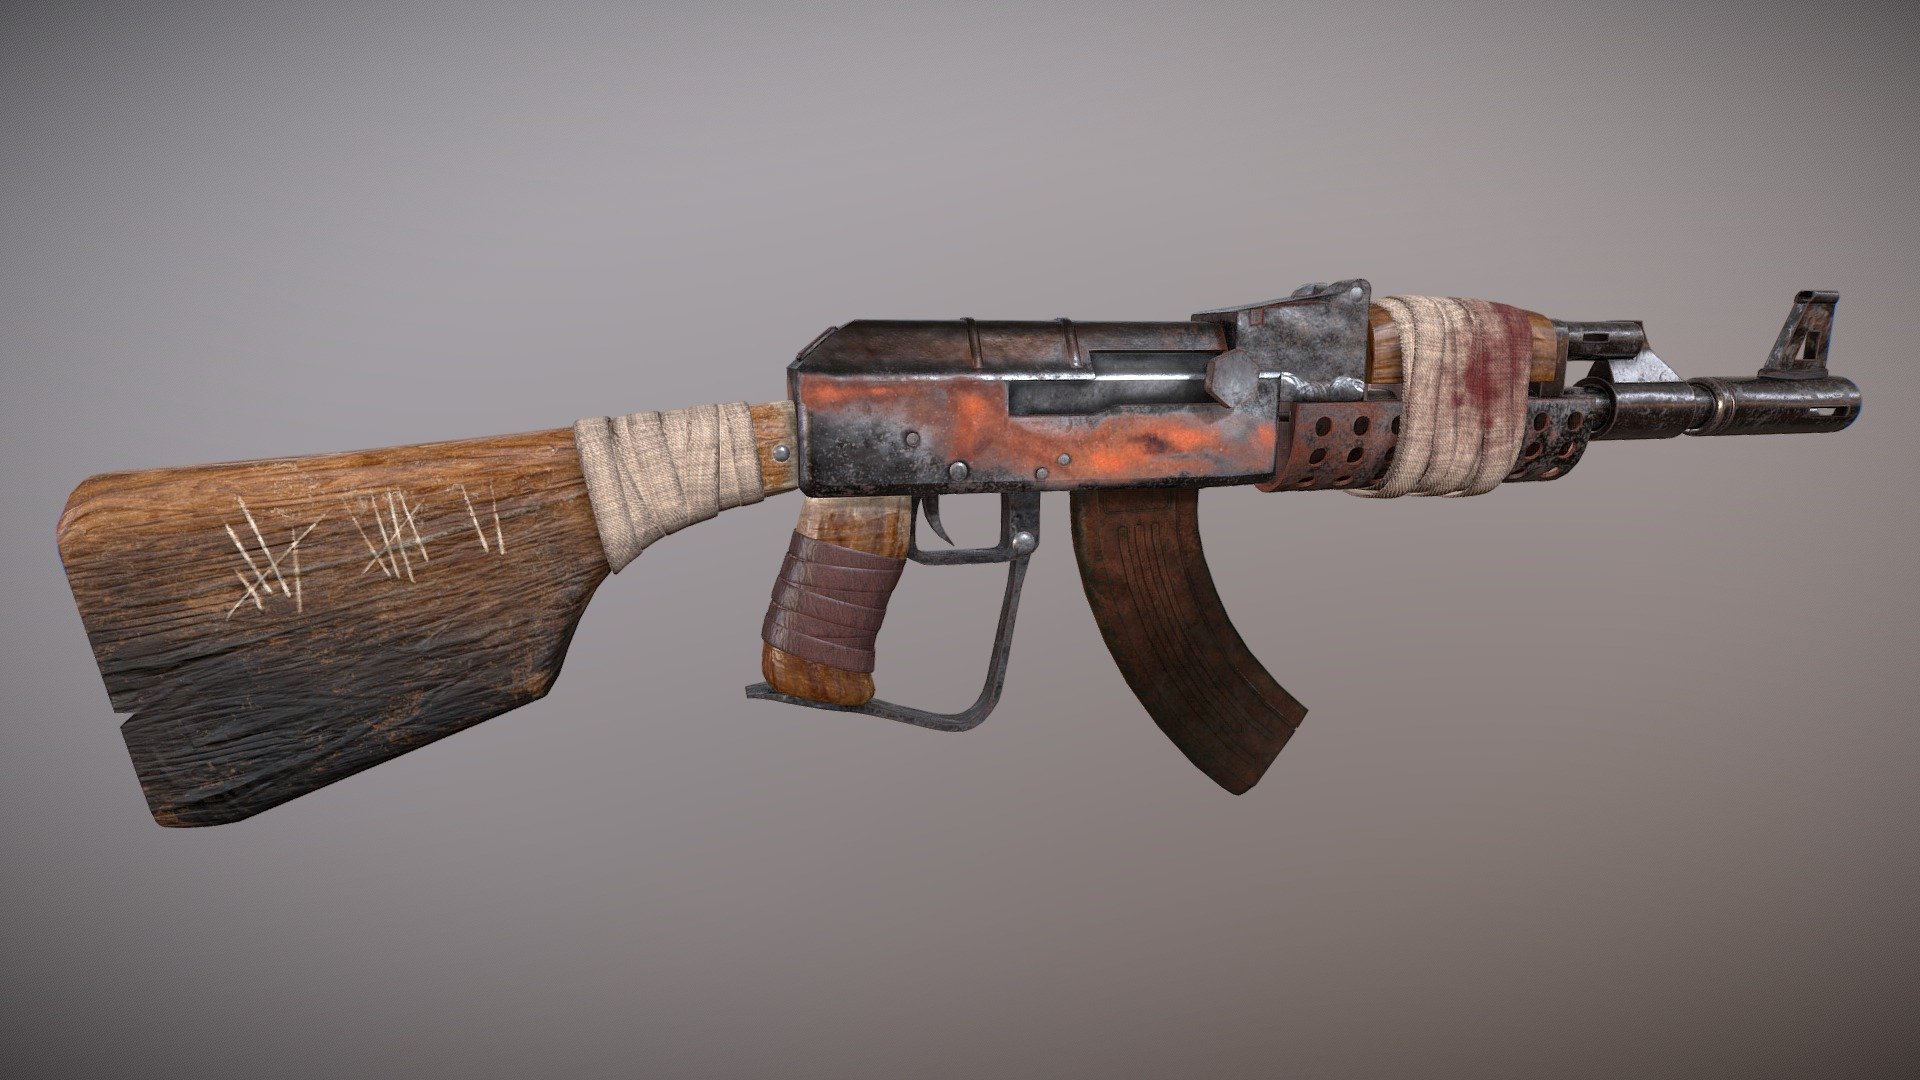 Modeled based of off old concept art from the game Rust 3d model